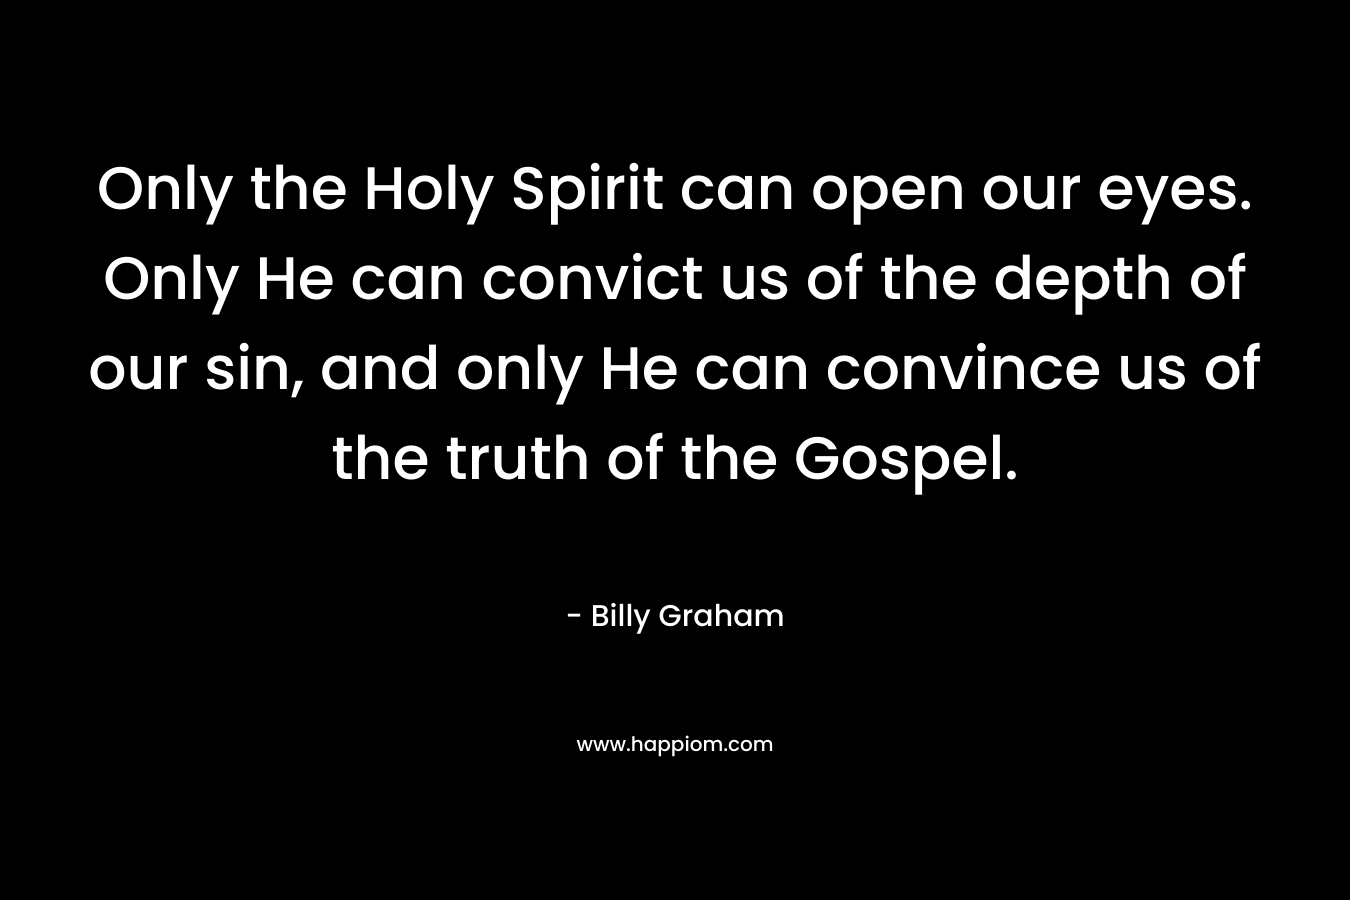 Only the Holy Spirit can open our eyes. Only He can convict us of the depth of our sin, and only He can convince us of the truth of the Gospel.